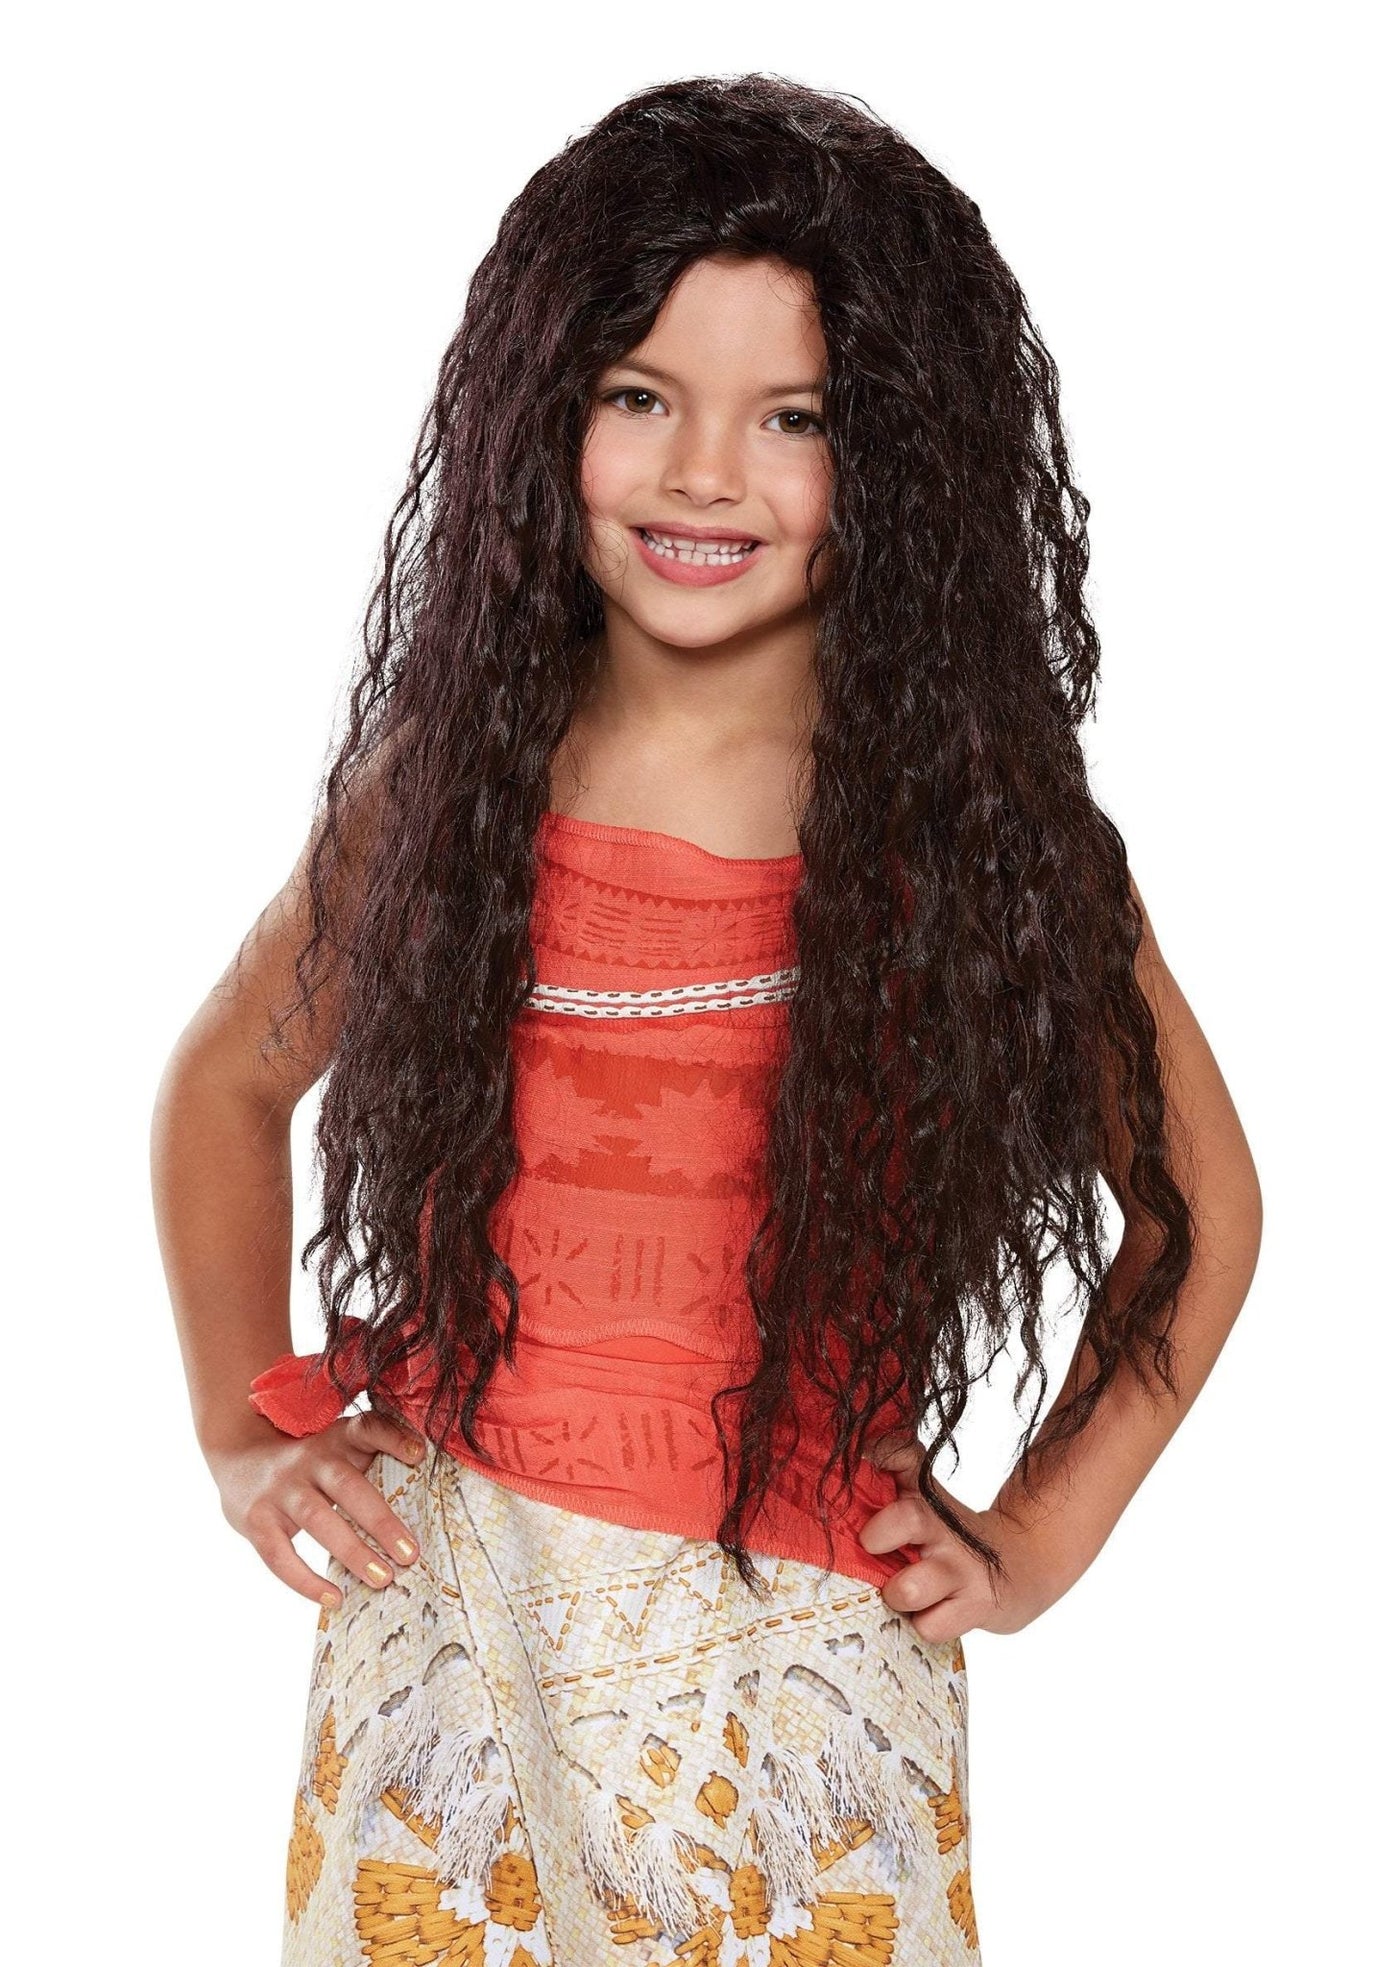 Girls Moana Deluxe Wig - JJ's Party House